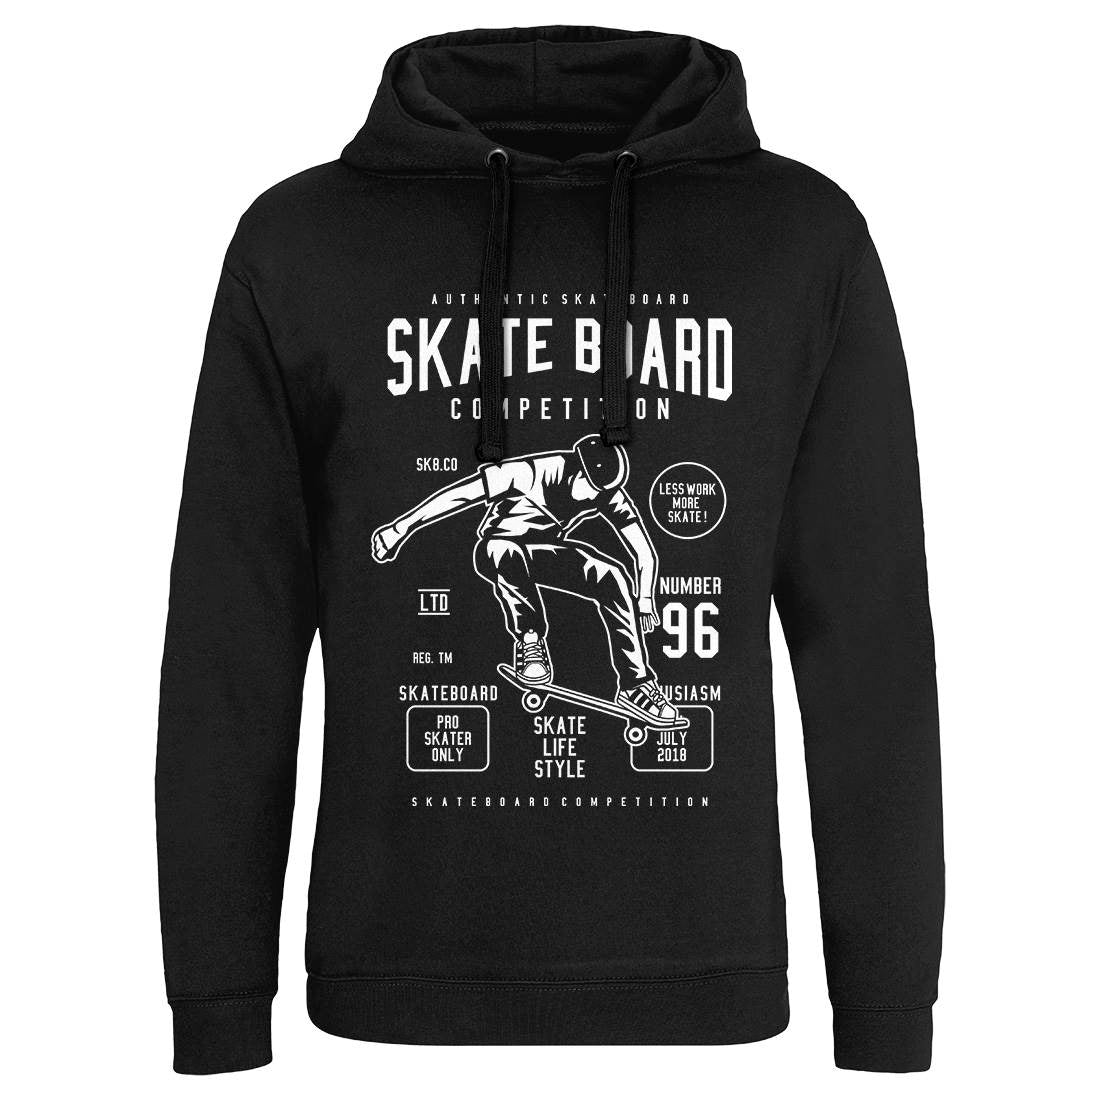 Skateboard Competition Mens Hoodie Without Pocket Skate B623